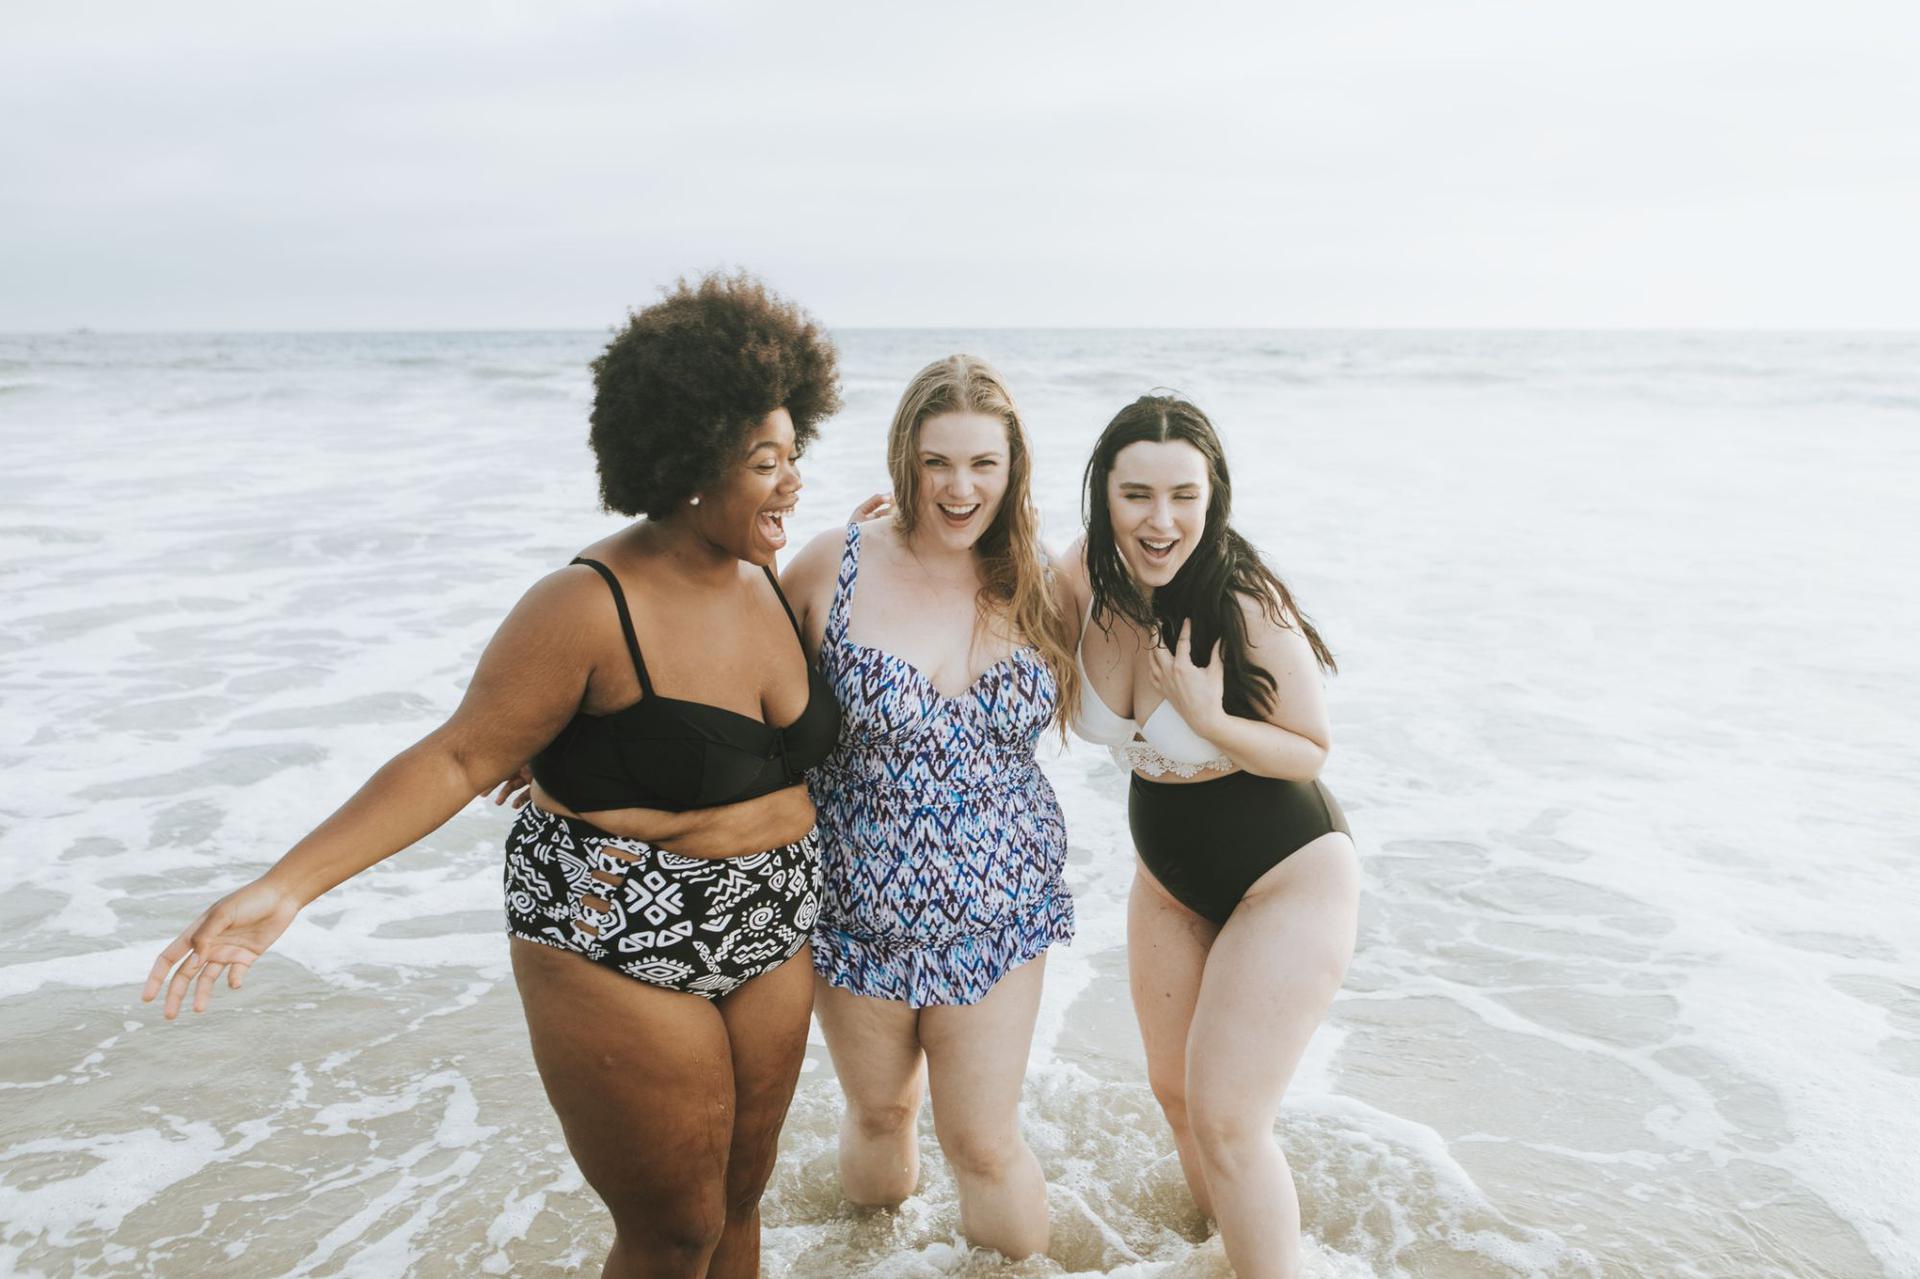 What Should A Chubby Girl Wear To The Beach? - Cheap Surf Gear